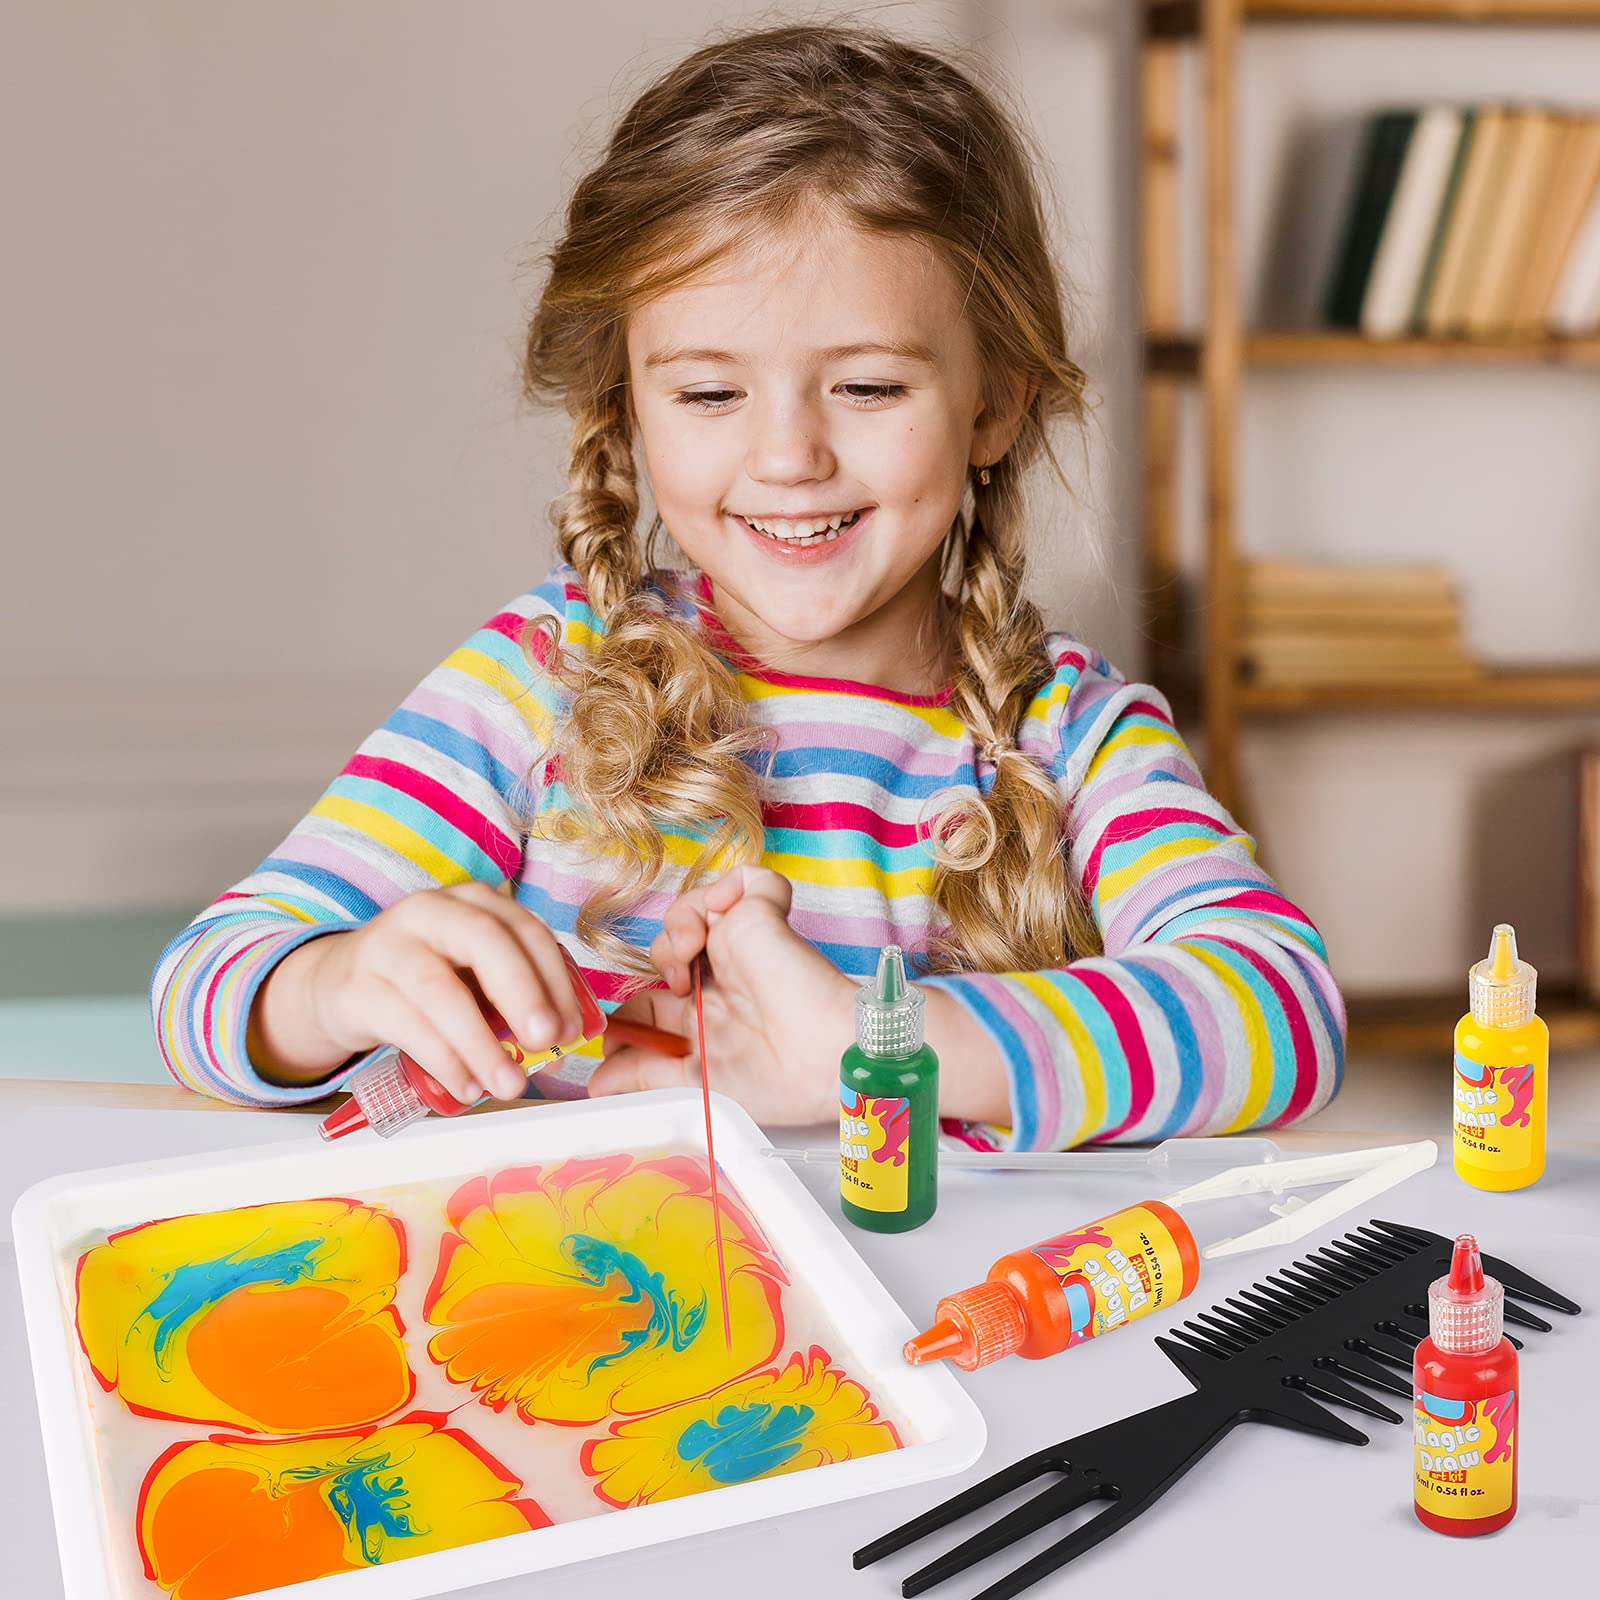 Titoclar Arts & Crafts for Kids Ages 6-12, Water Marbling Paint Kit, Ideal Gifts for Kids, Christmas Toys for Girls & Boys Age 4 5 6 7 8 9 10 11 12 Year Old (Paint on Water, 12 Colors)